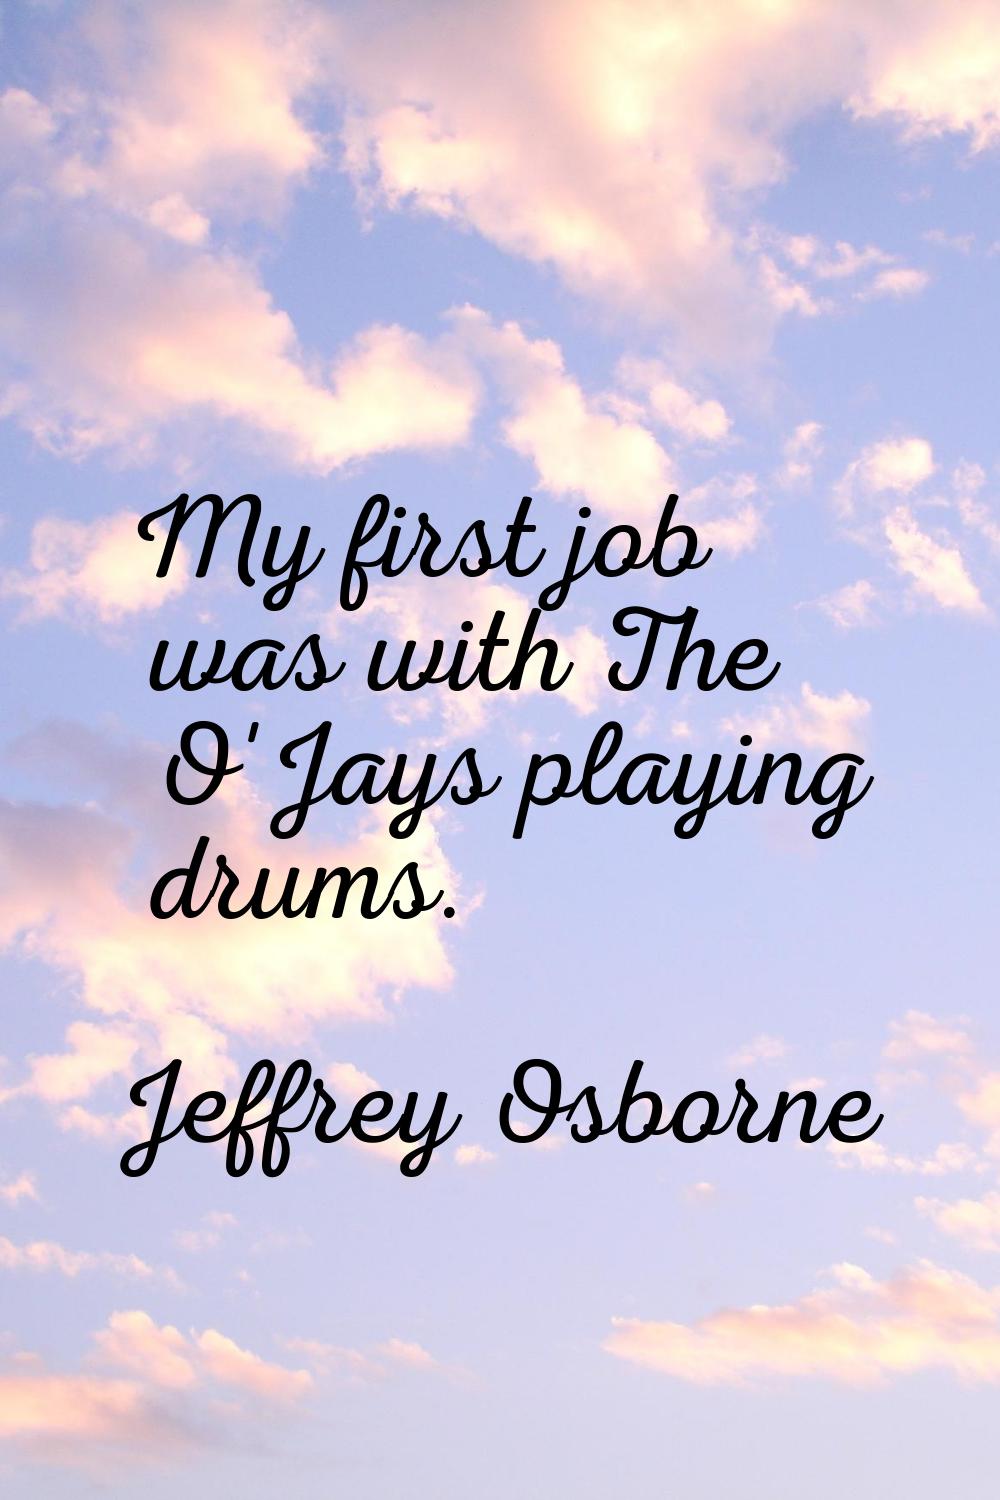 My first job was with The O'Jays playing drums.